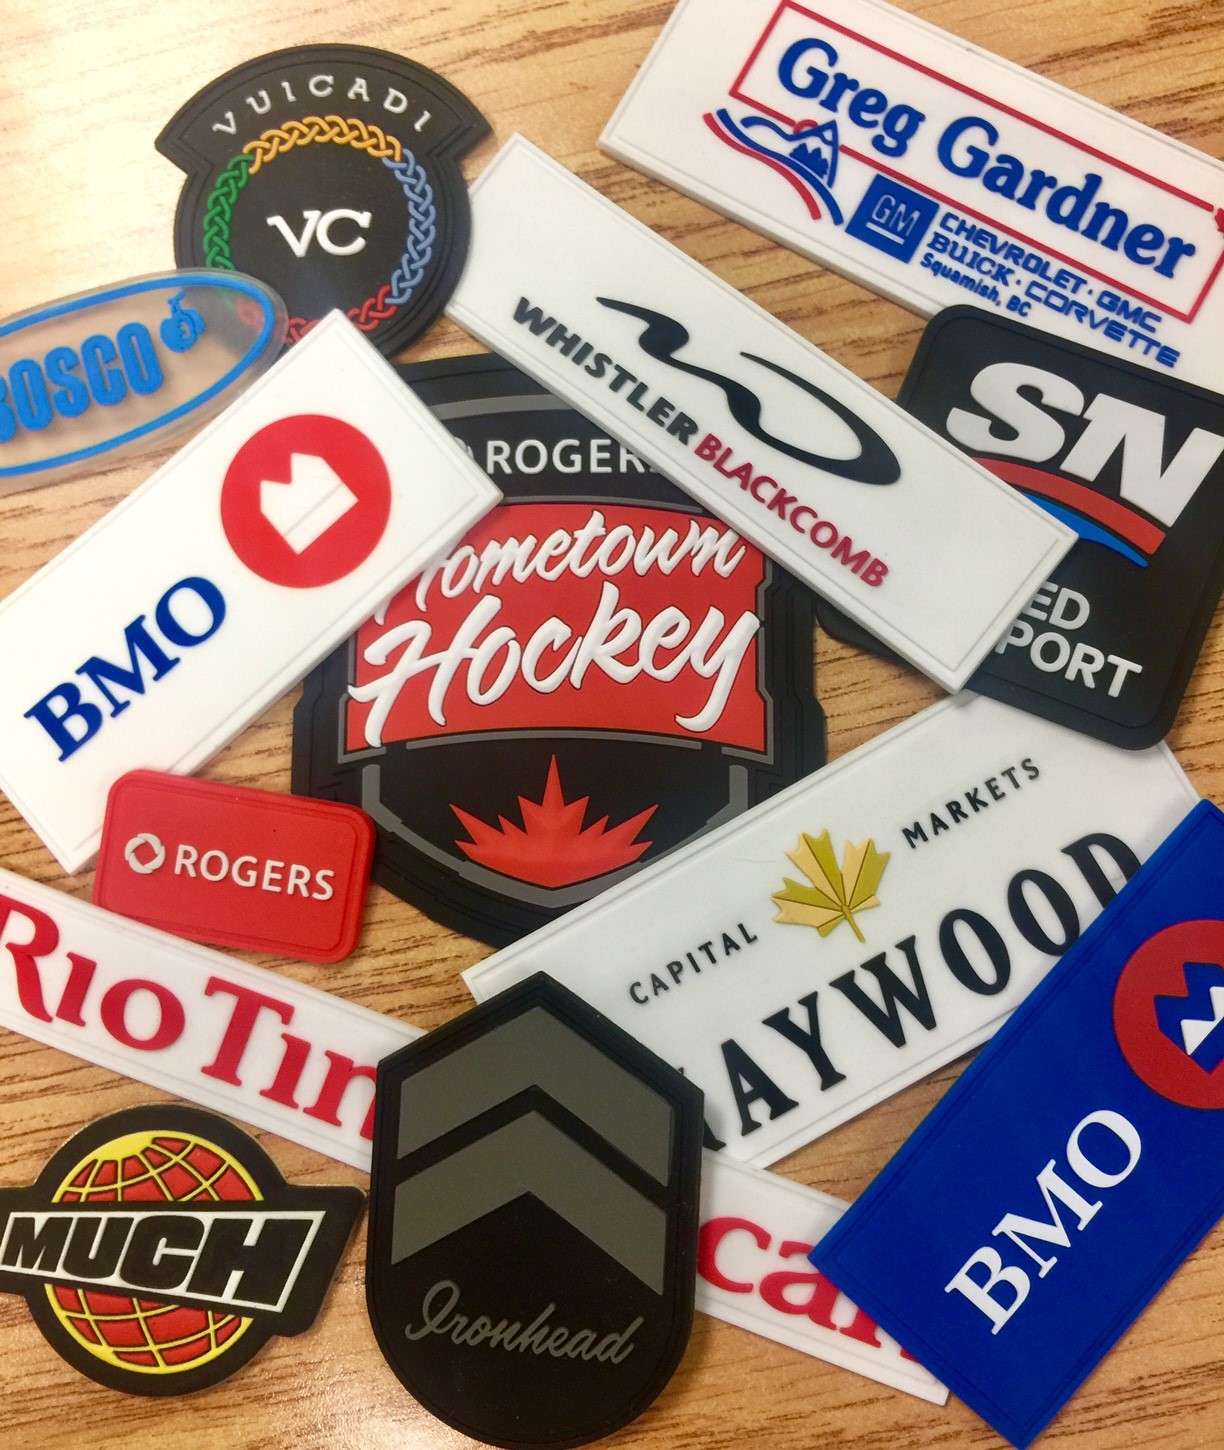 PVC Corporate Patches (1)